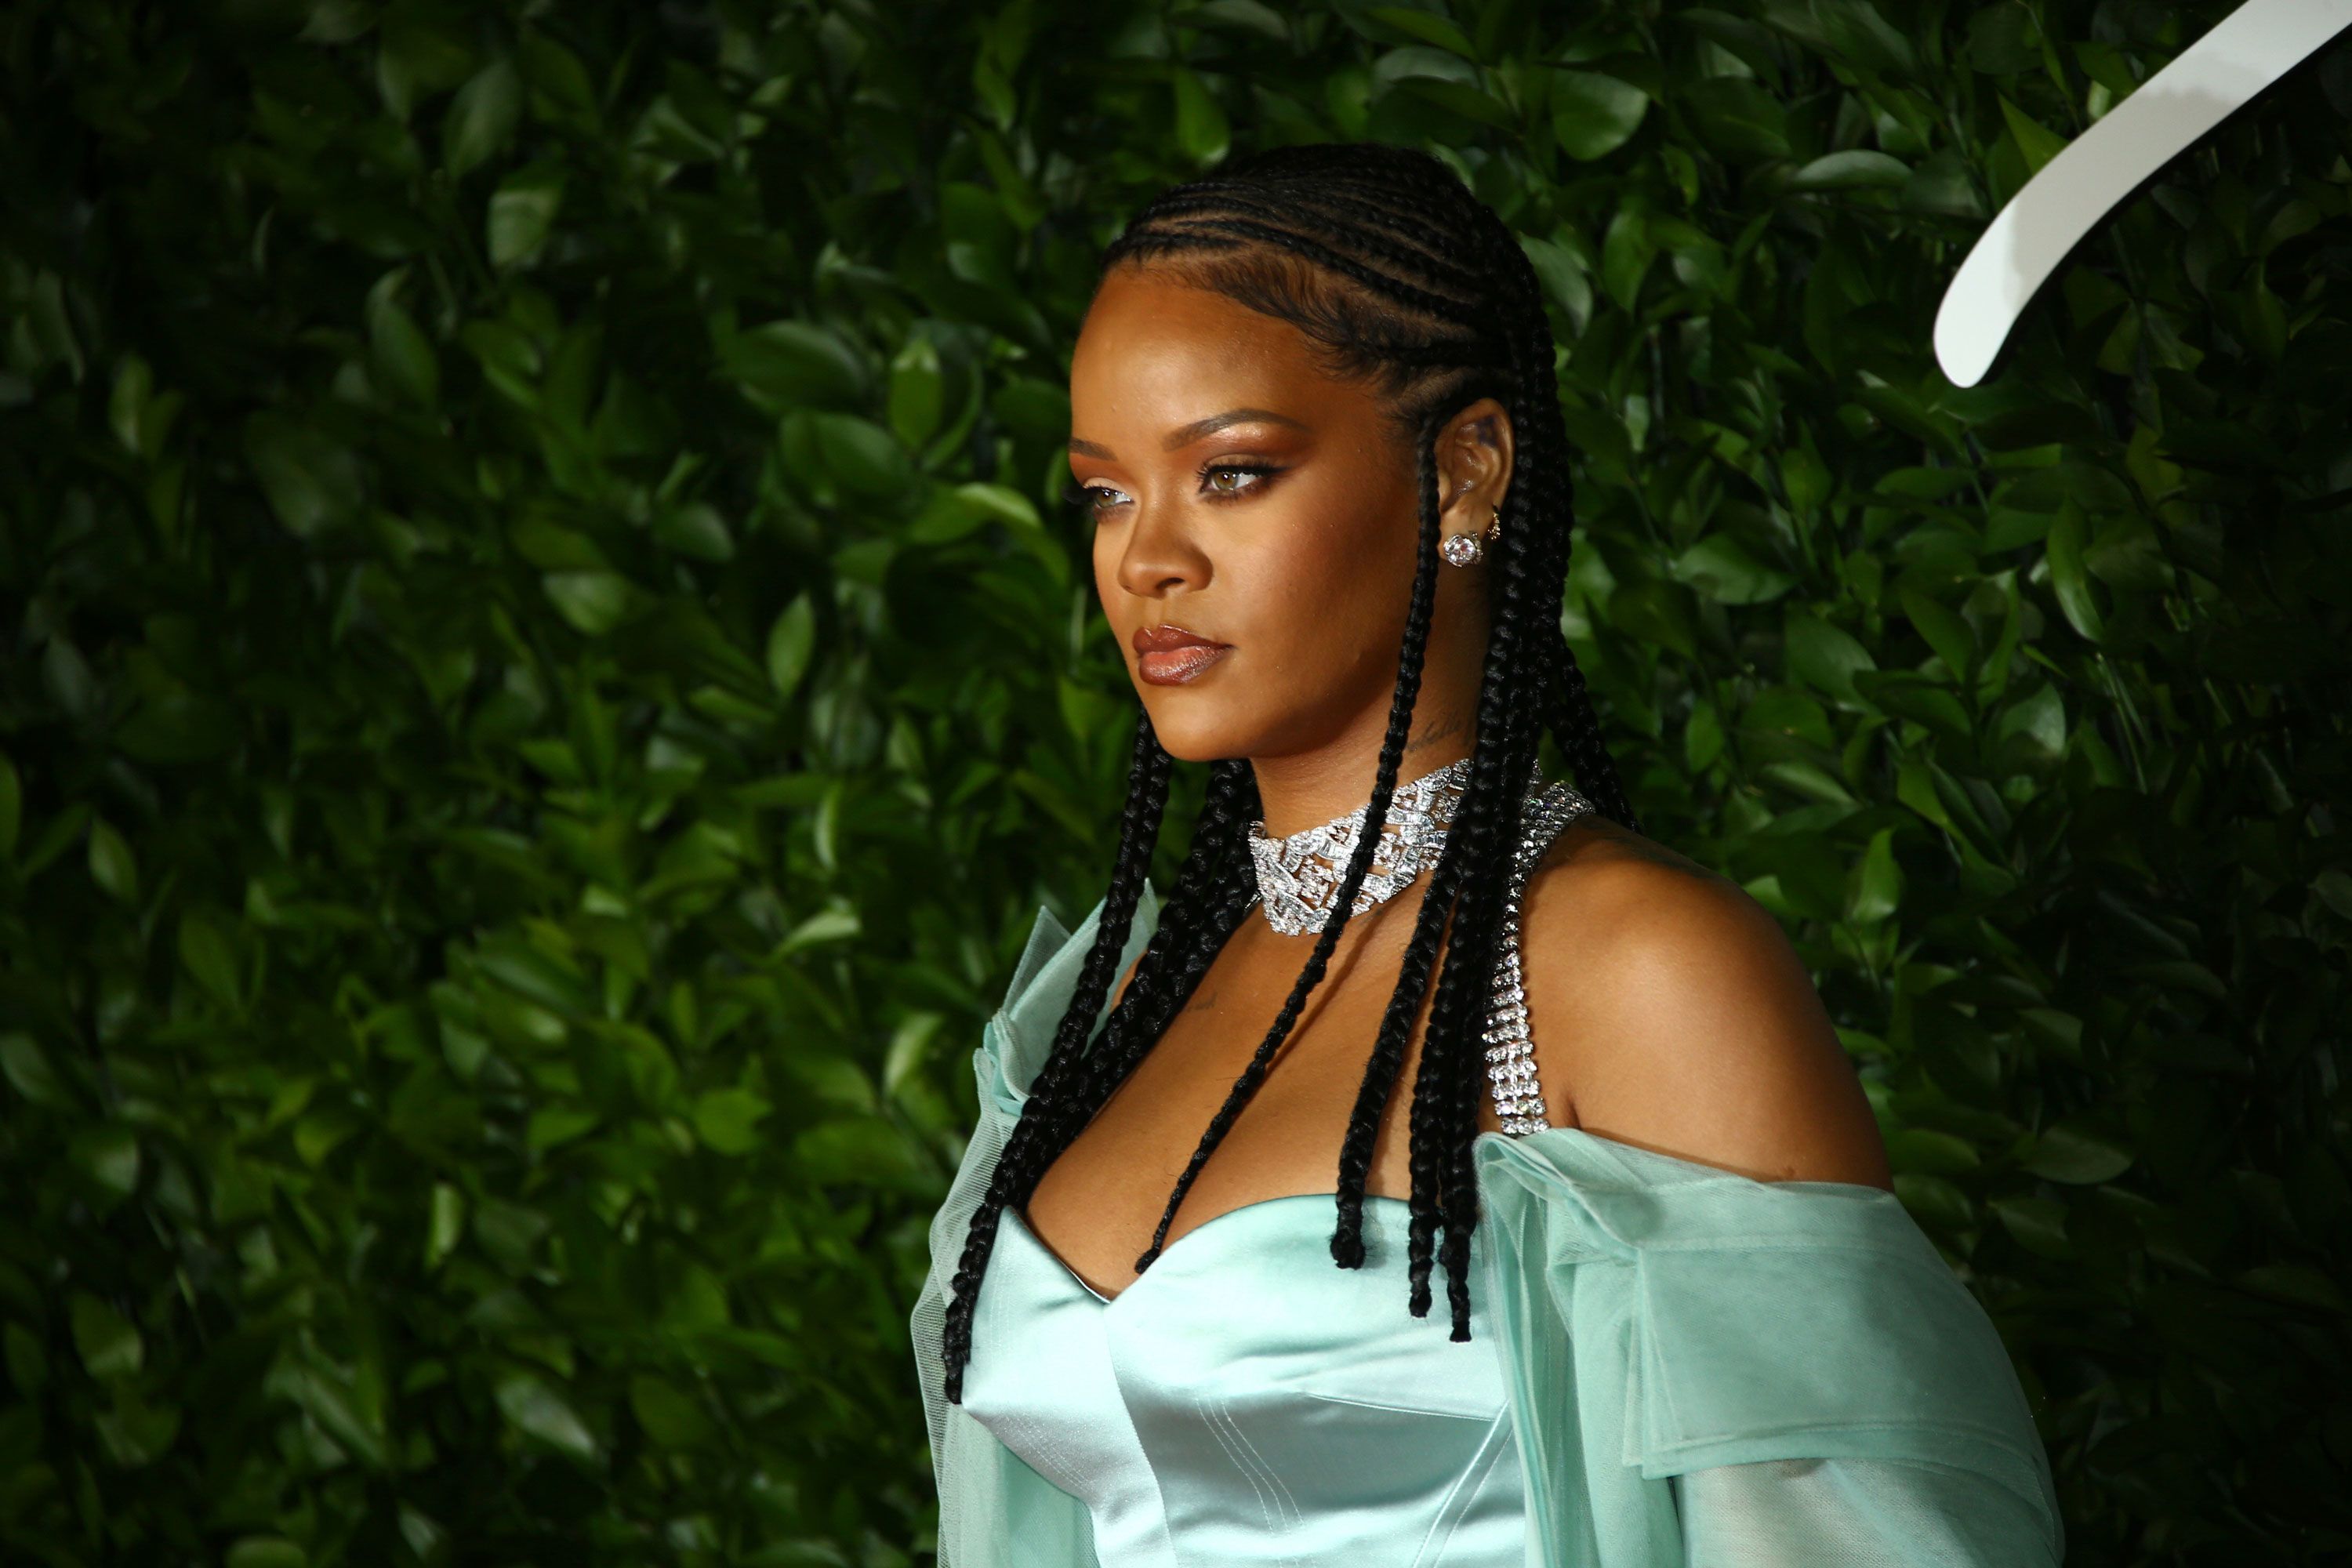 Rihanna's Fenty Fashion House is put on ice after just two years